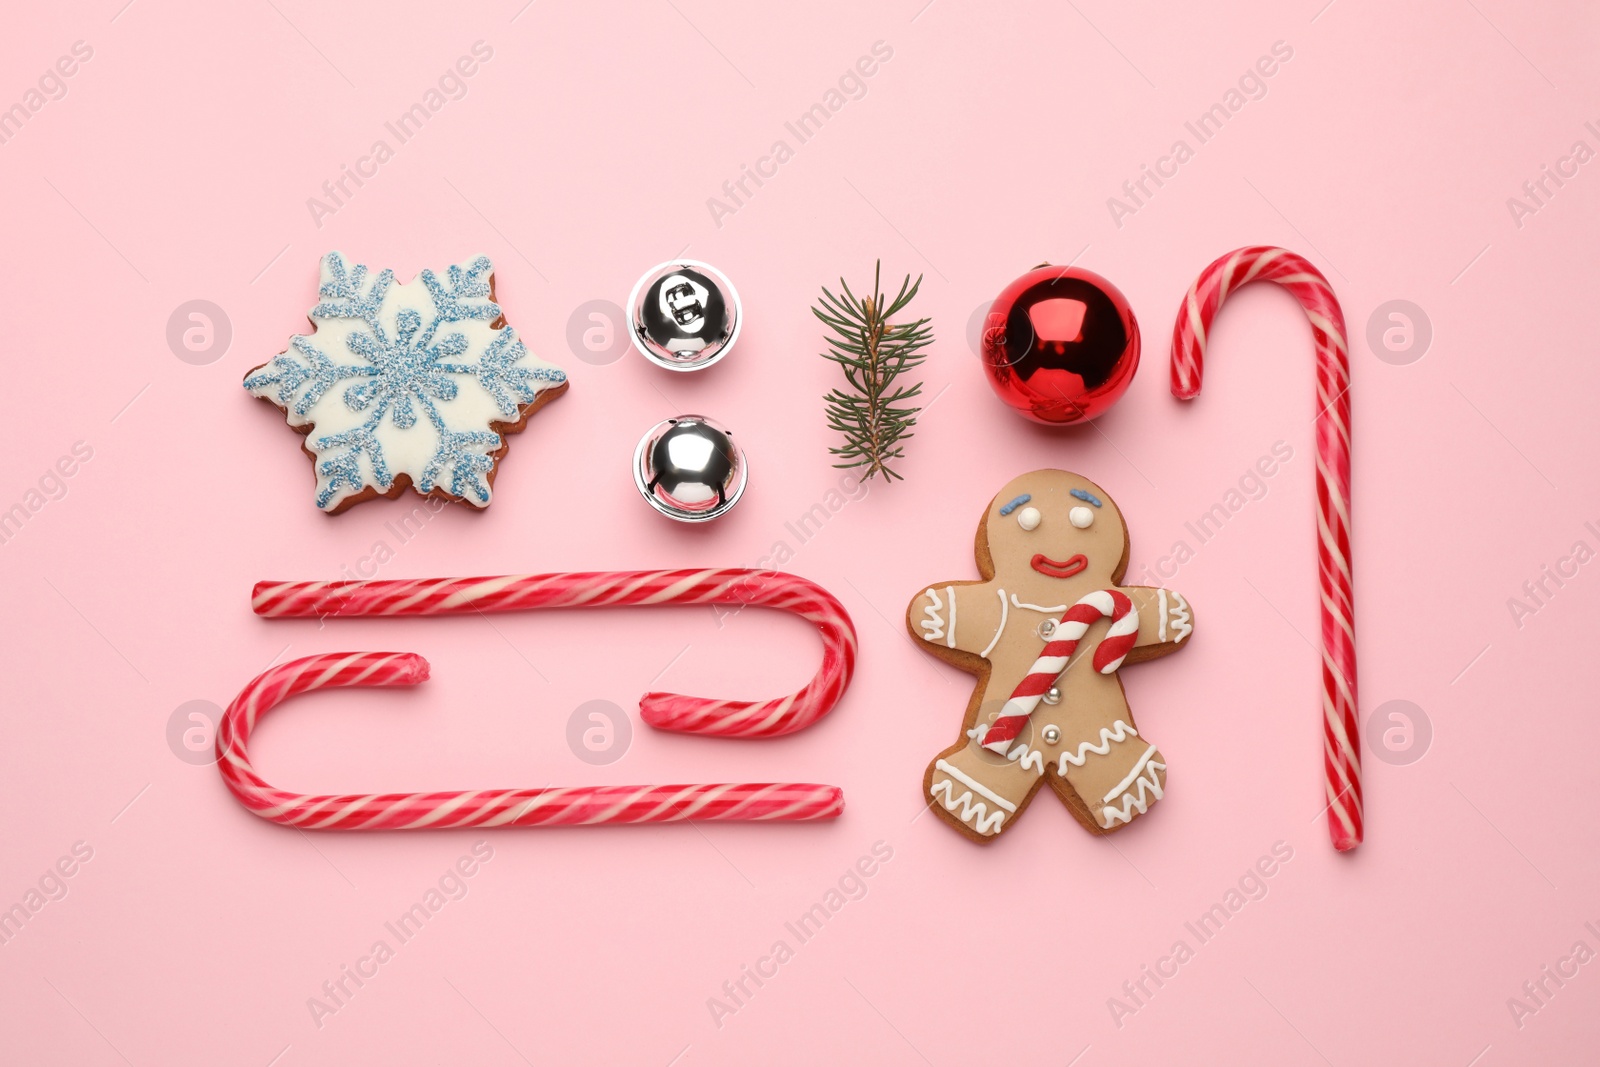 Photo of Flat lay composition with sweet candy canes and Christmas decor on pink background